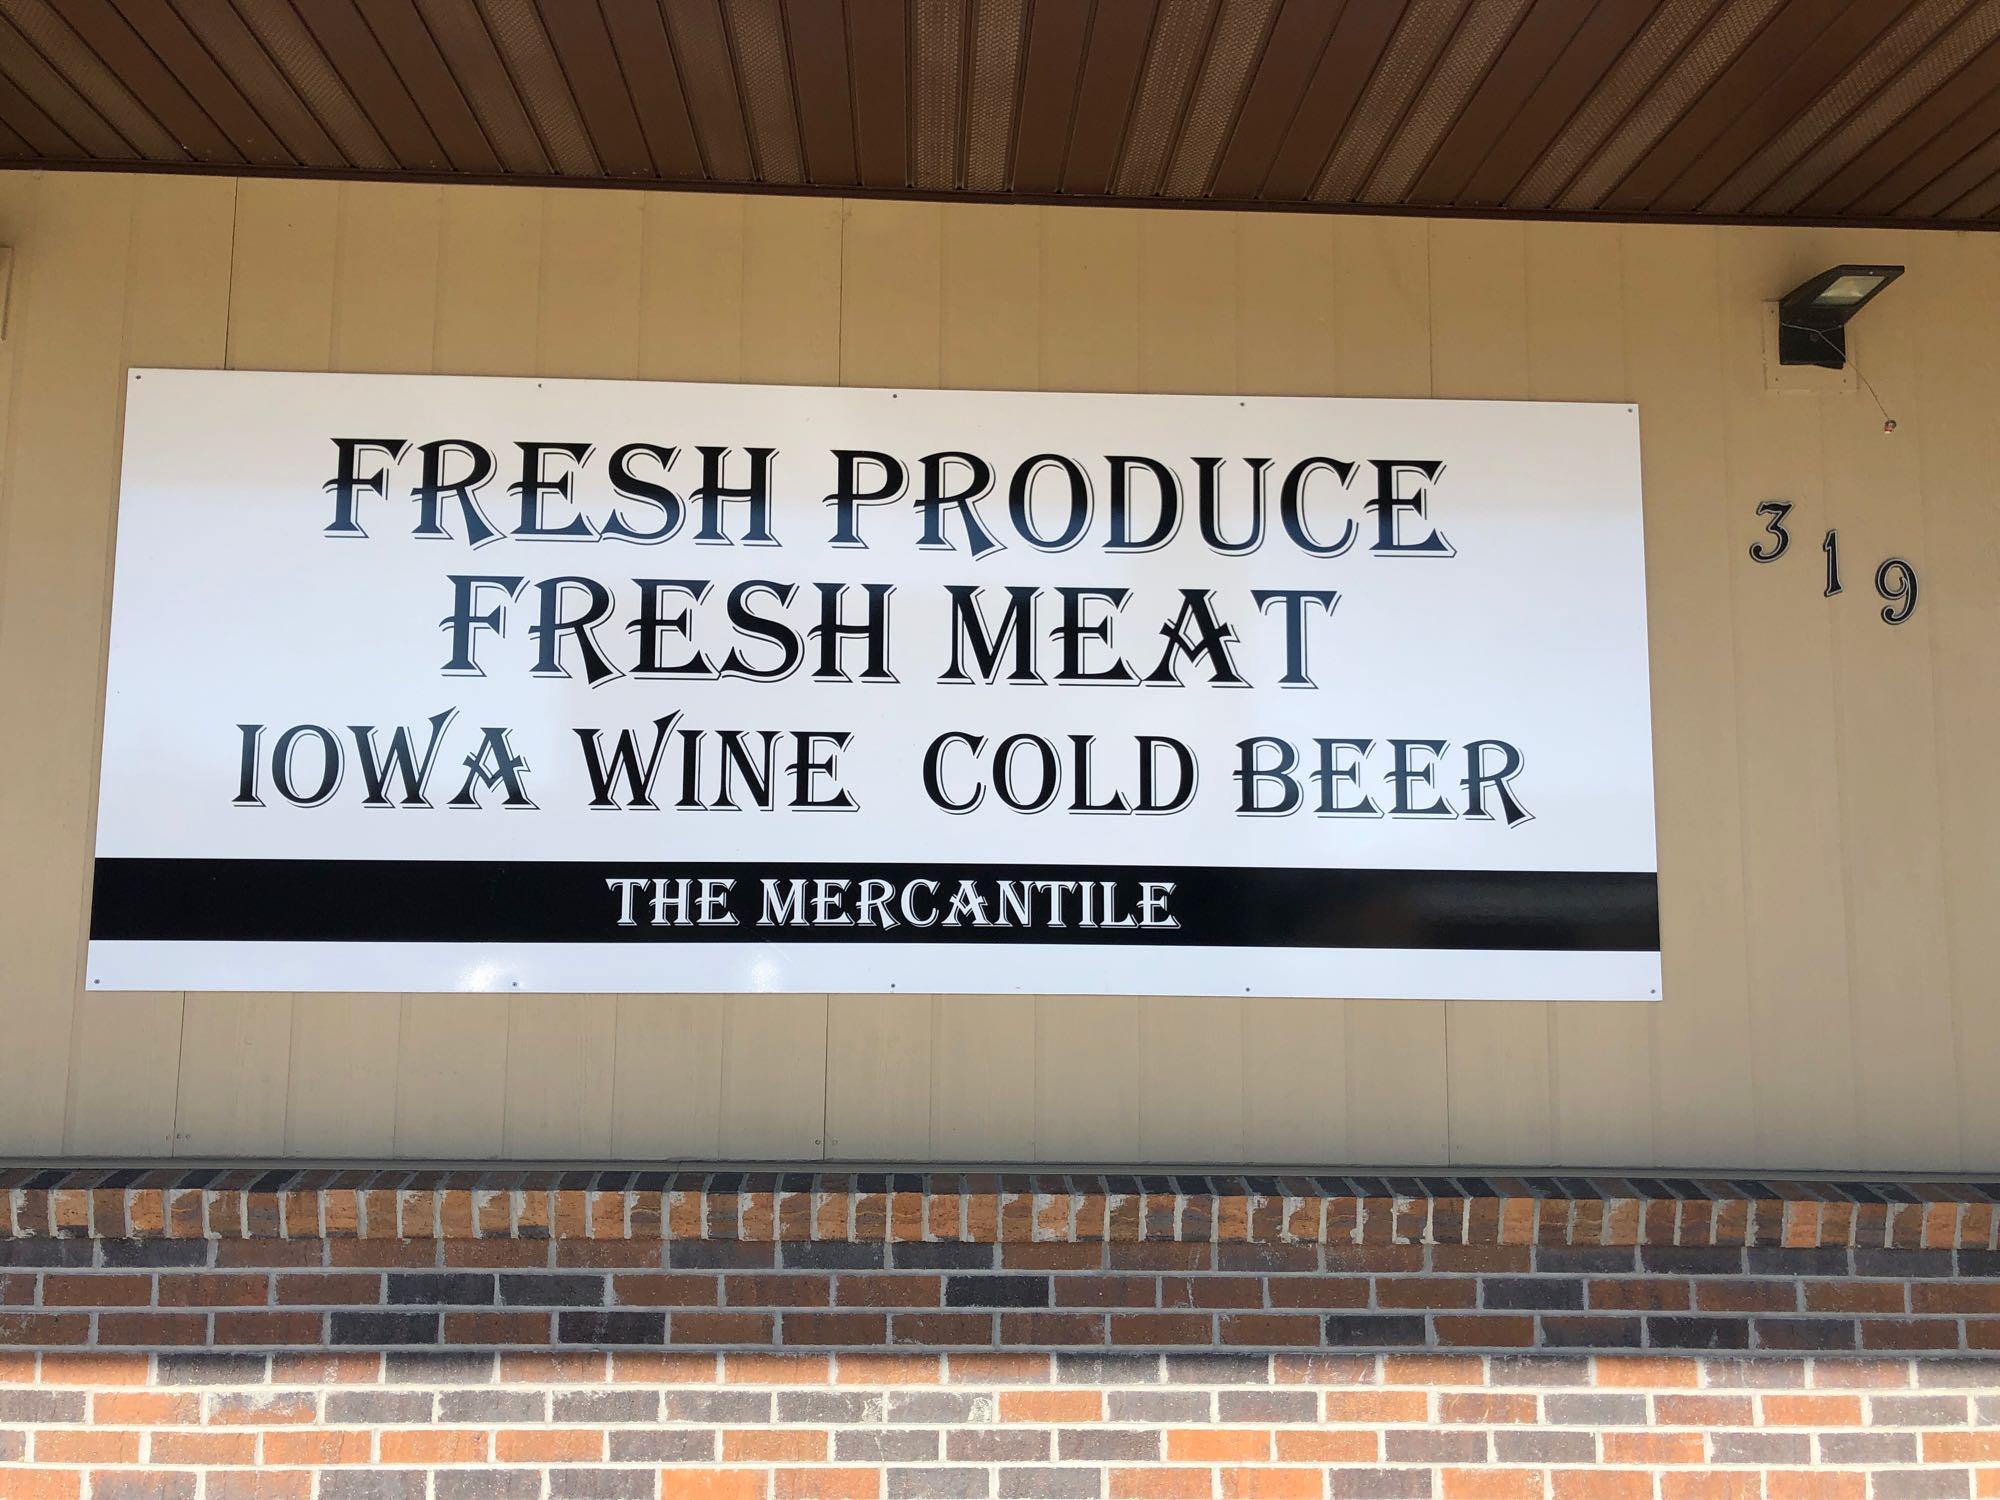 The Mercantile Grocery Store